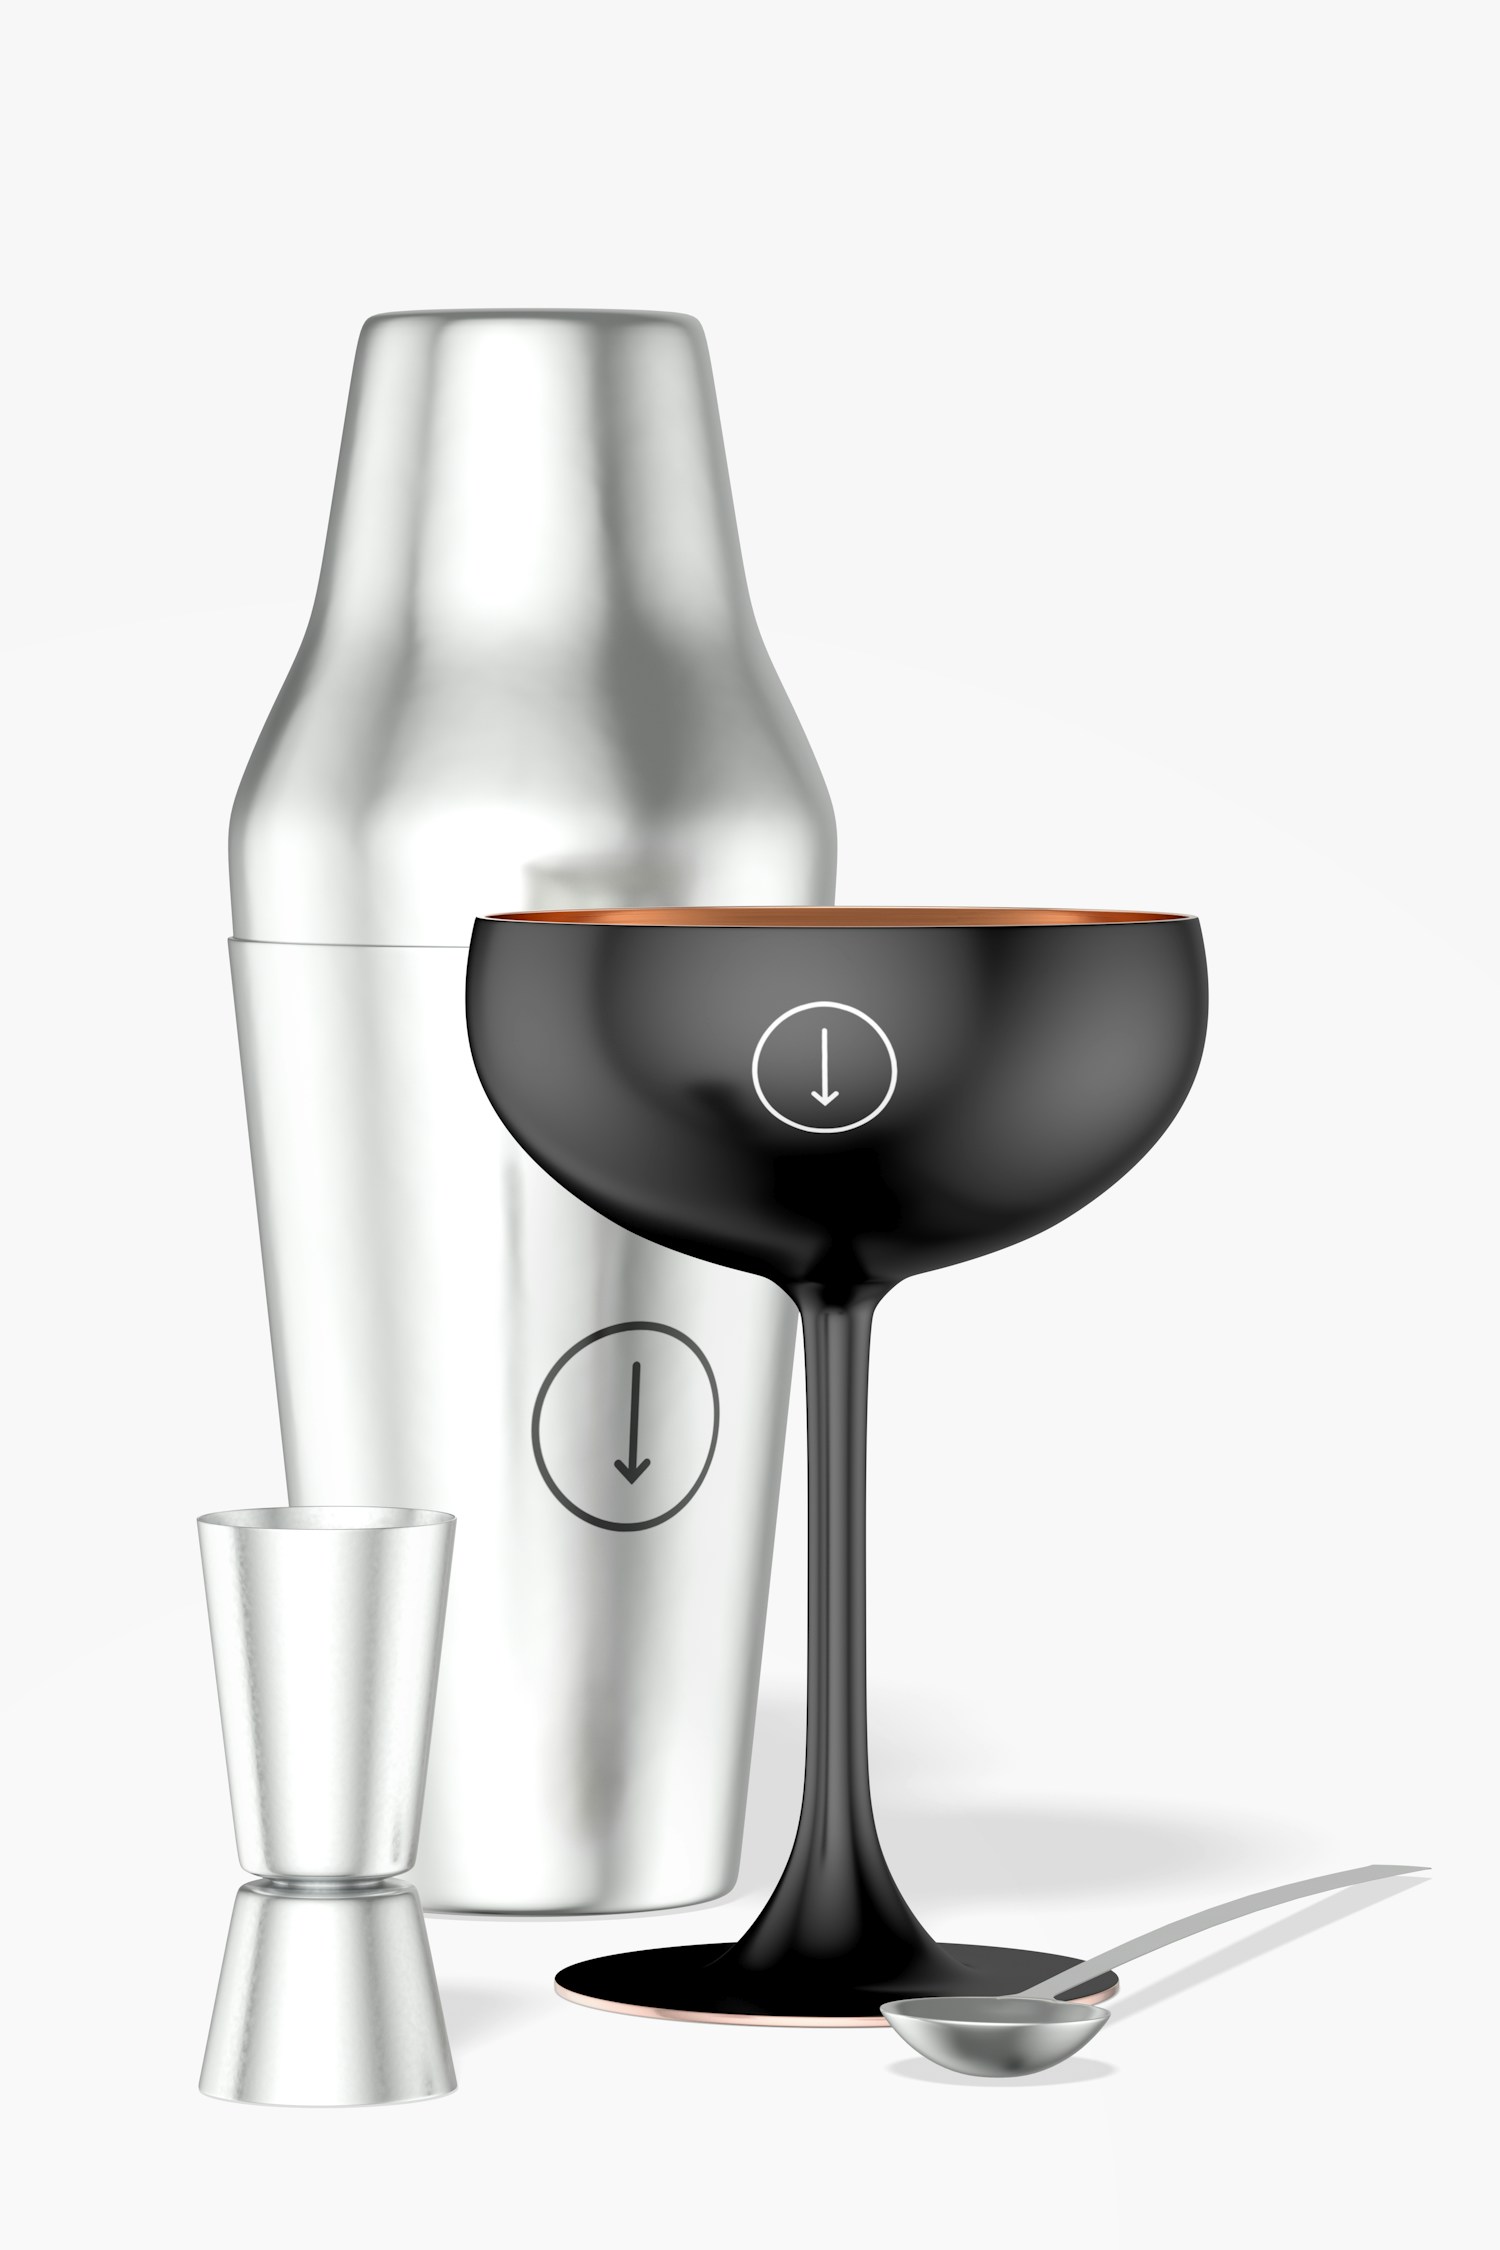 Metal Coupe Cocktail Glass Mockup, with Shaker